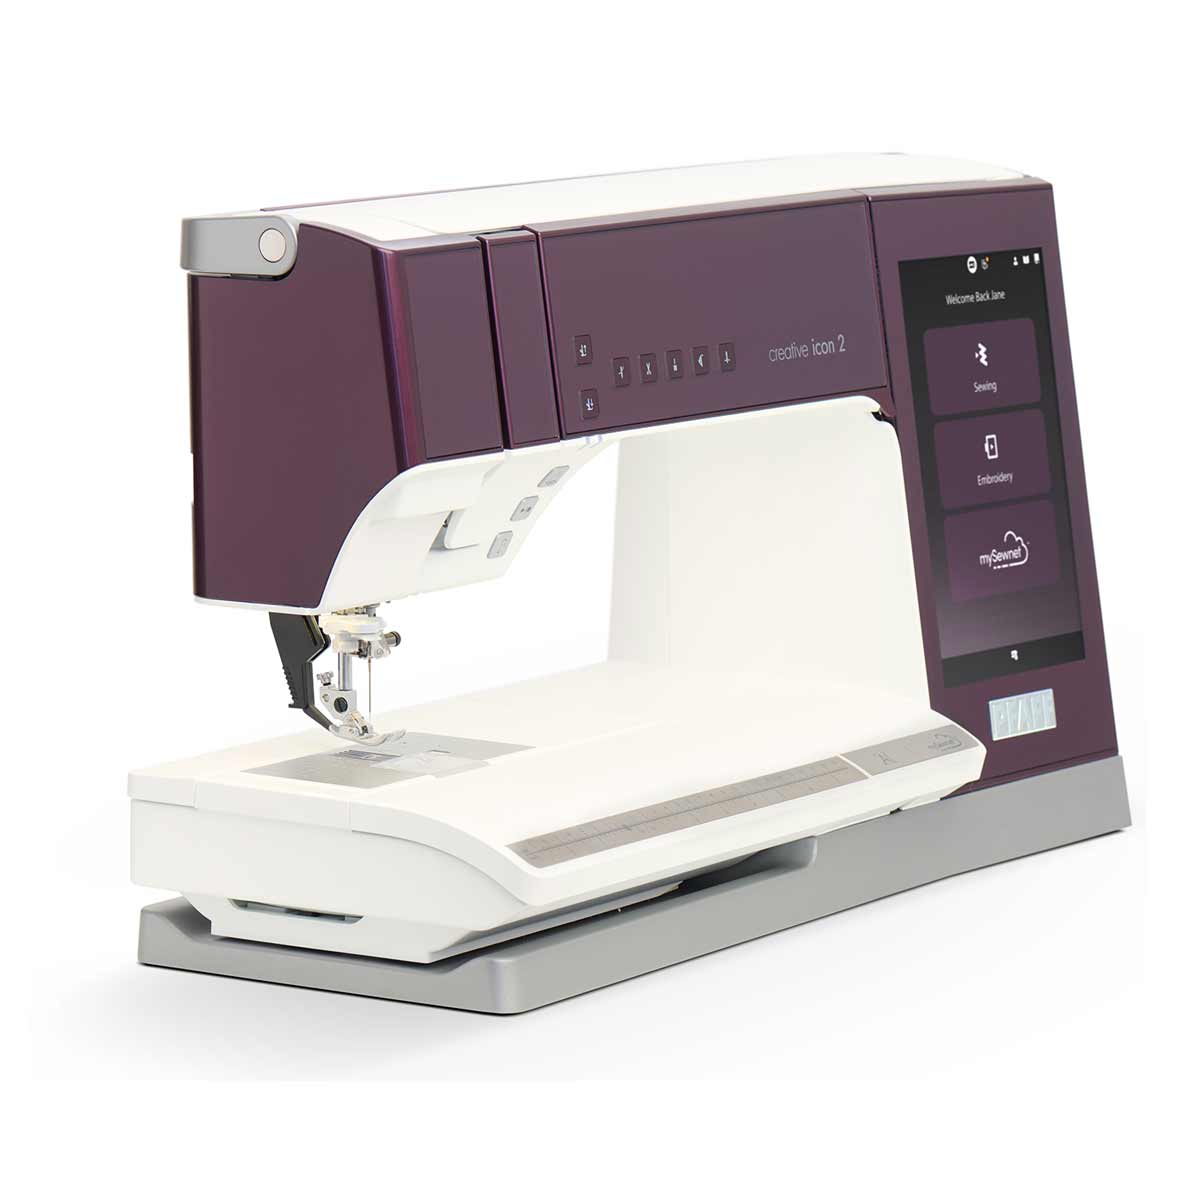 creative icon™ 2 Sewing and Embroidery Machine + GIFT w/PURCHASE